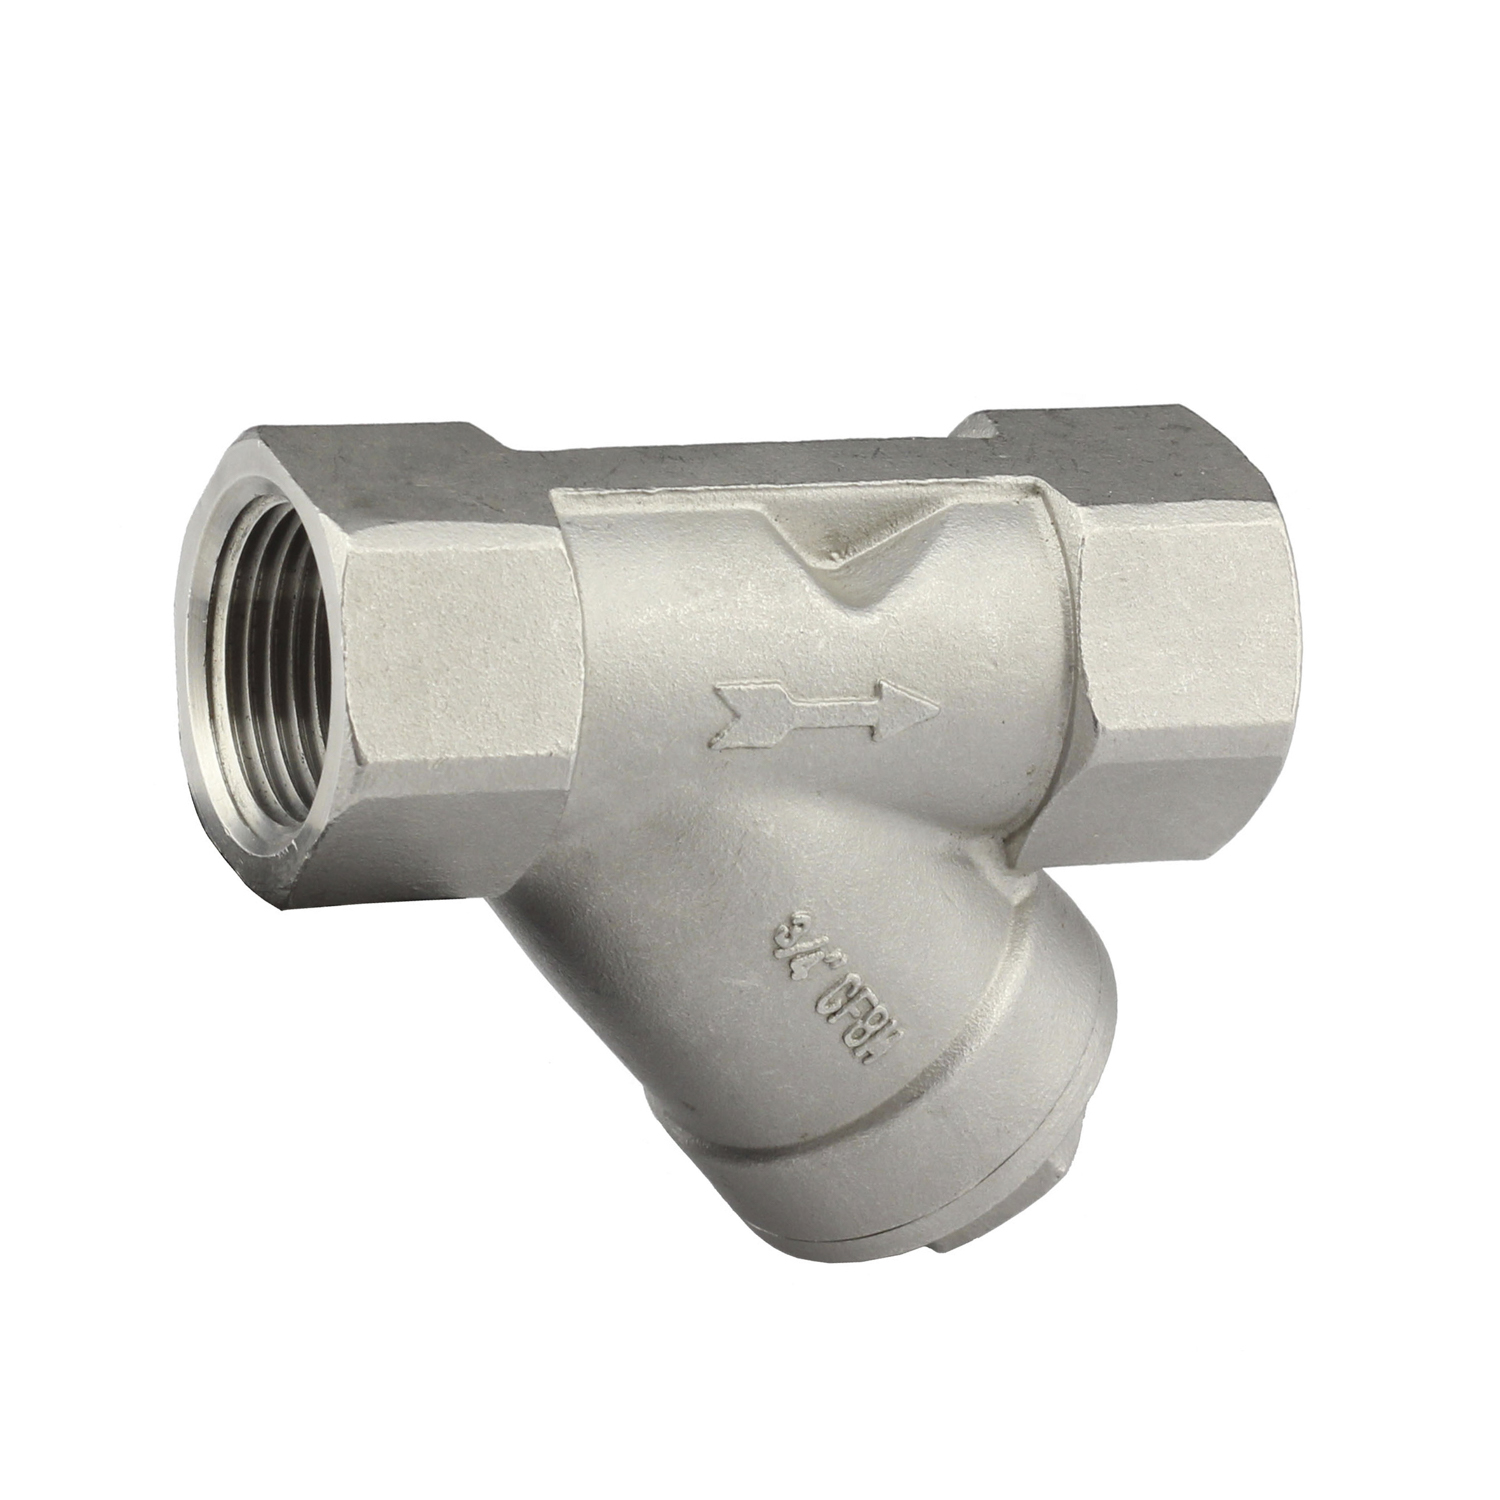 1/4'' 304/316/316L stainless steel ball valve with Full-port 1000PSI